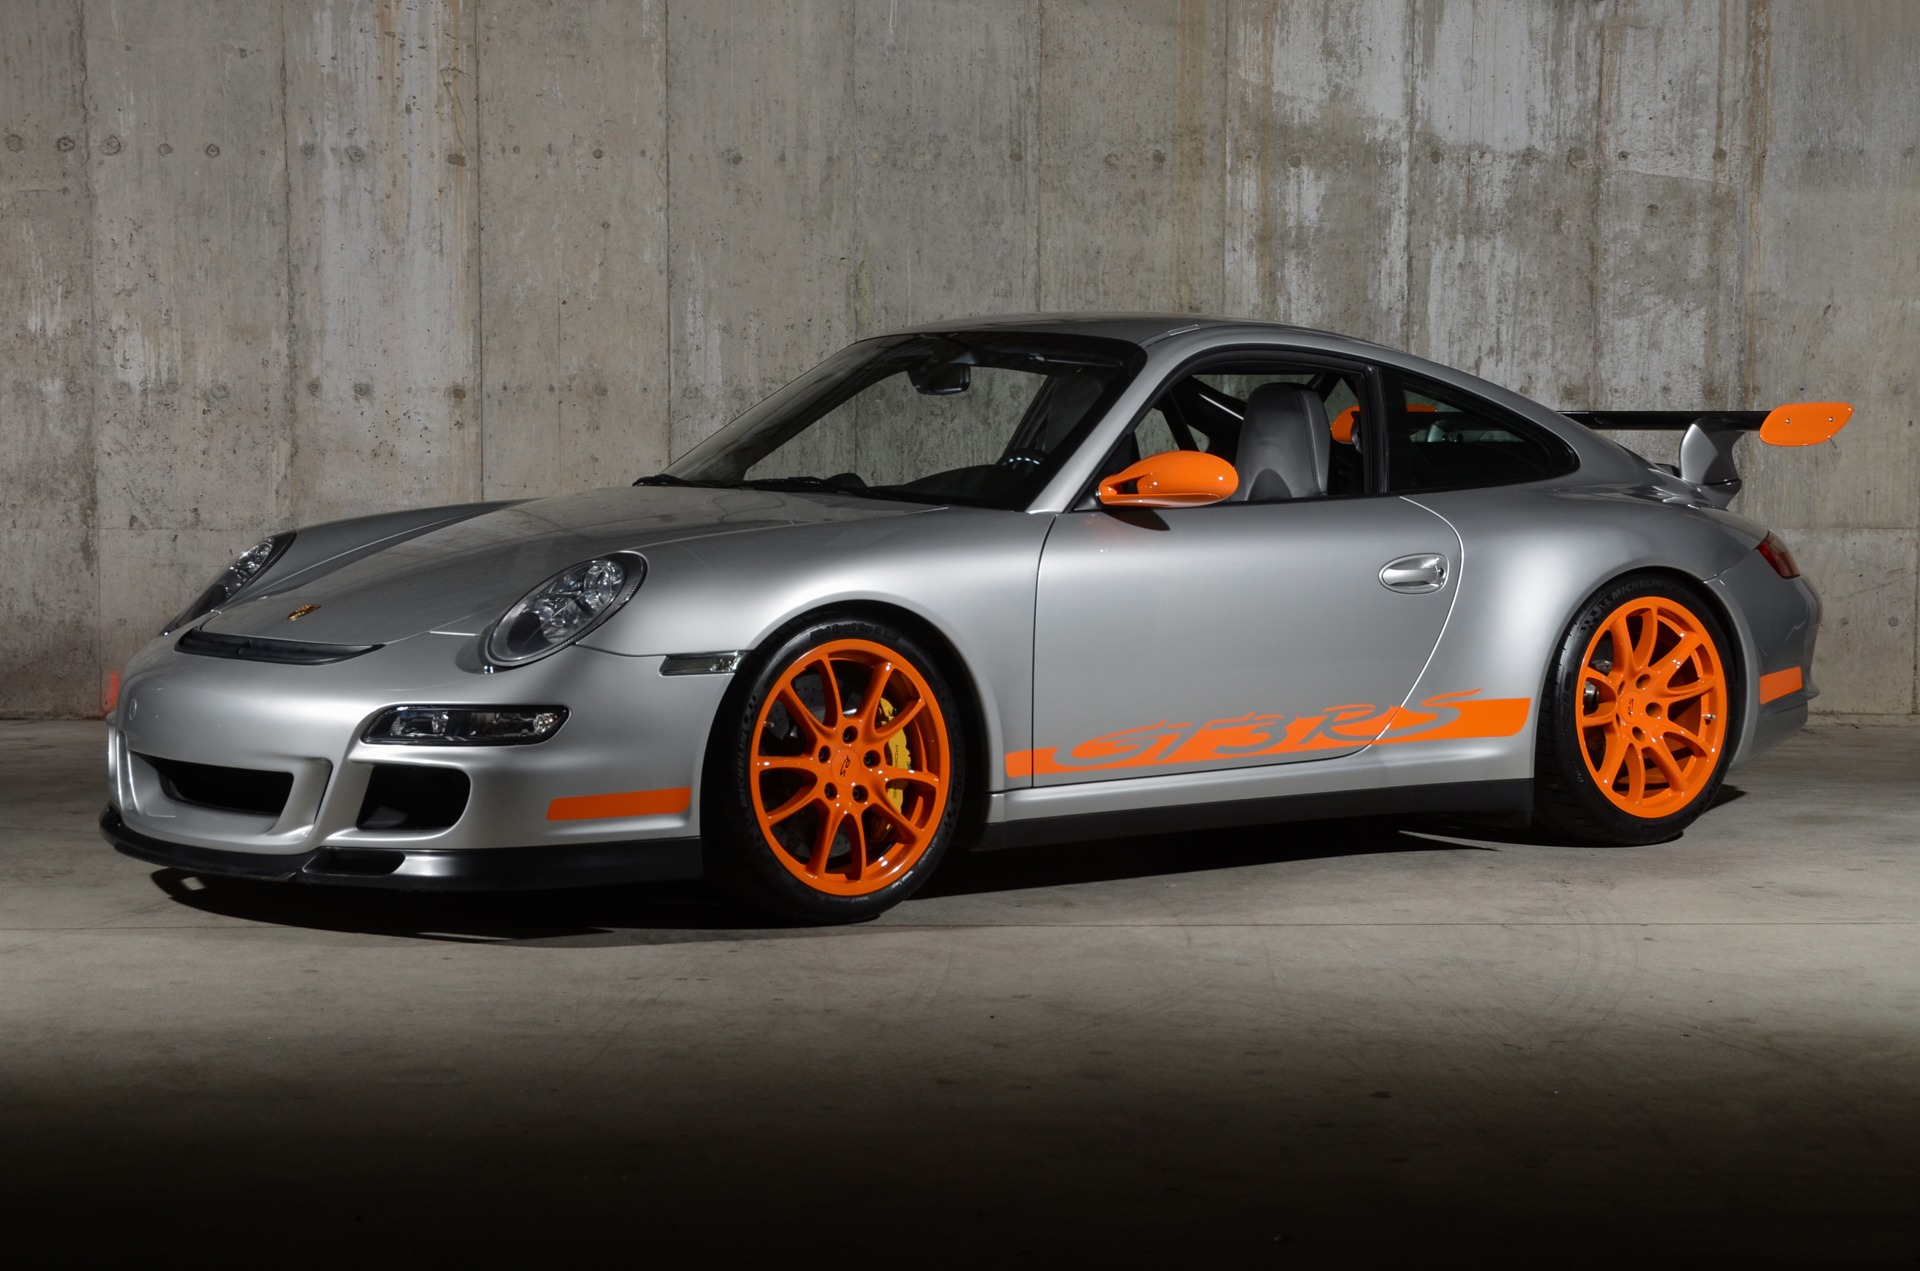 Used 2007 Porsche 911 GT3 RS For Sale ($249,995) | Ryan Friedman 